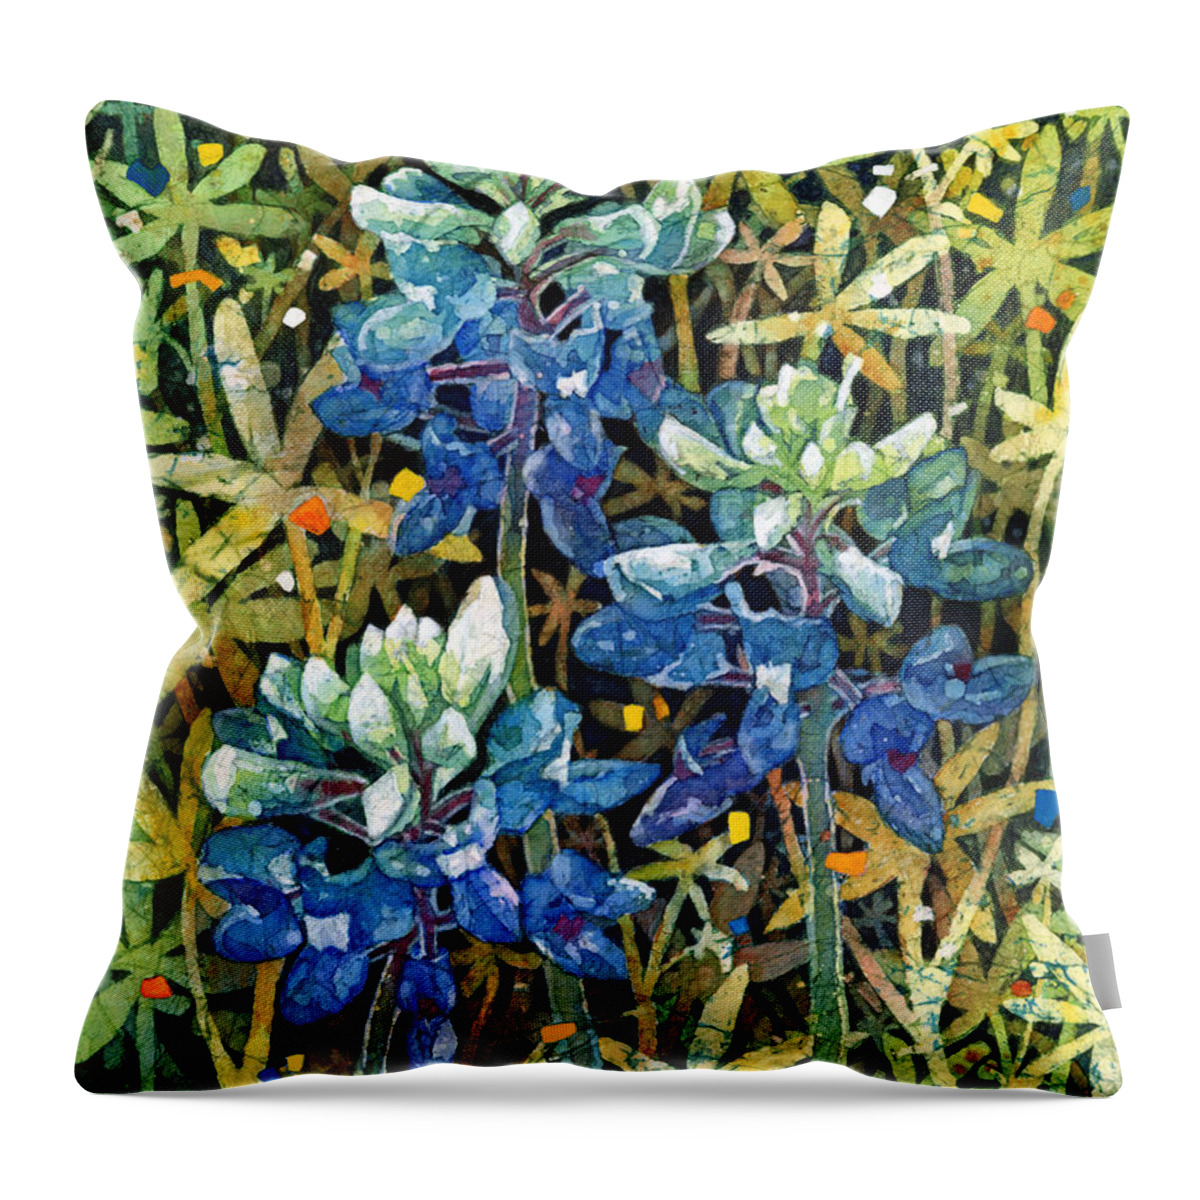 Bluebonnet Throw Pillow featuring the painting Garden Jewels II by Hailey E Herrera